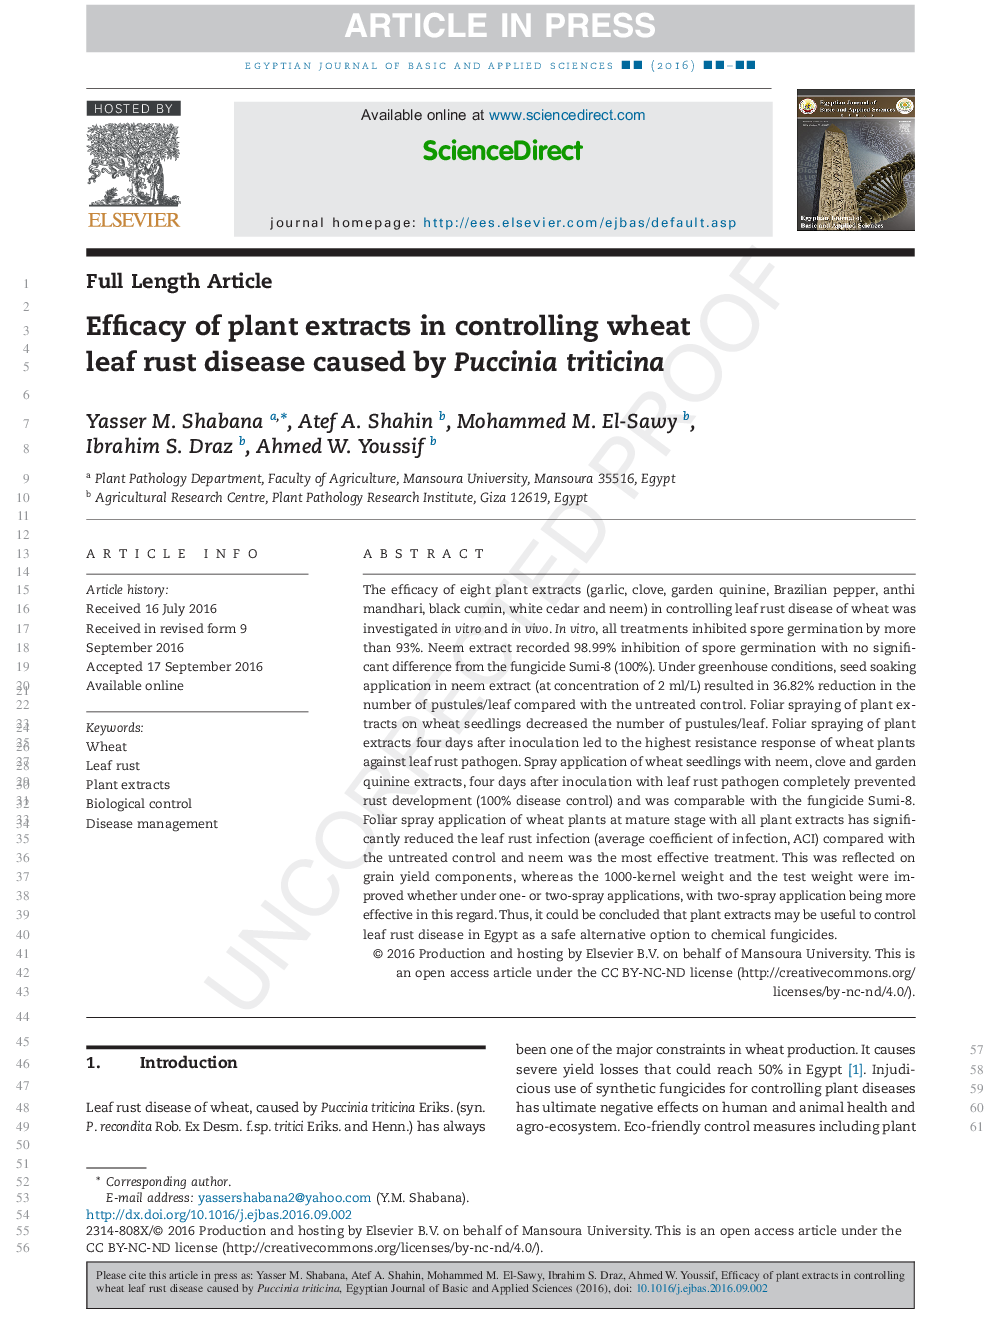 Efficacy of plant extracts in controlling wheat leaf rust disease caused by Puccinia triticina